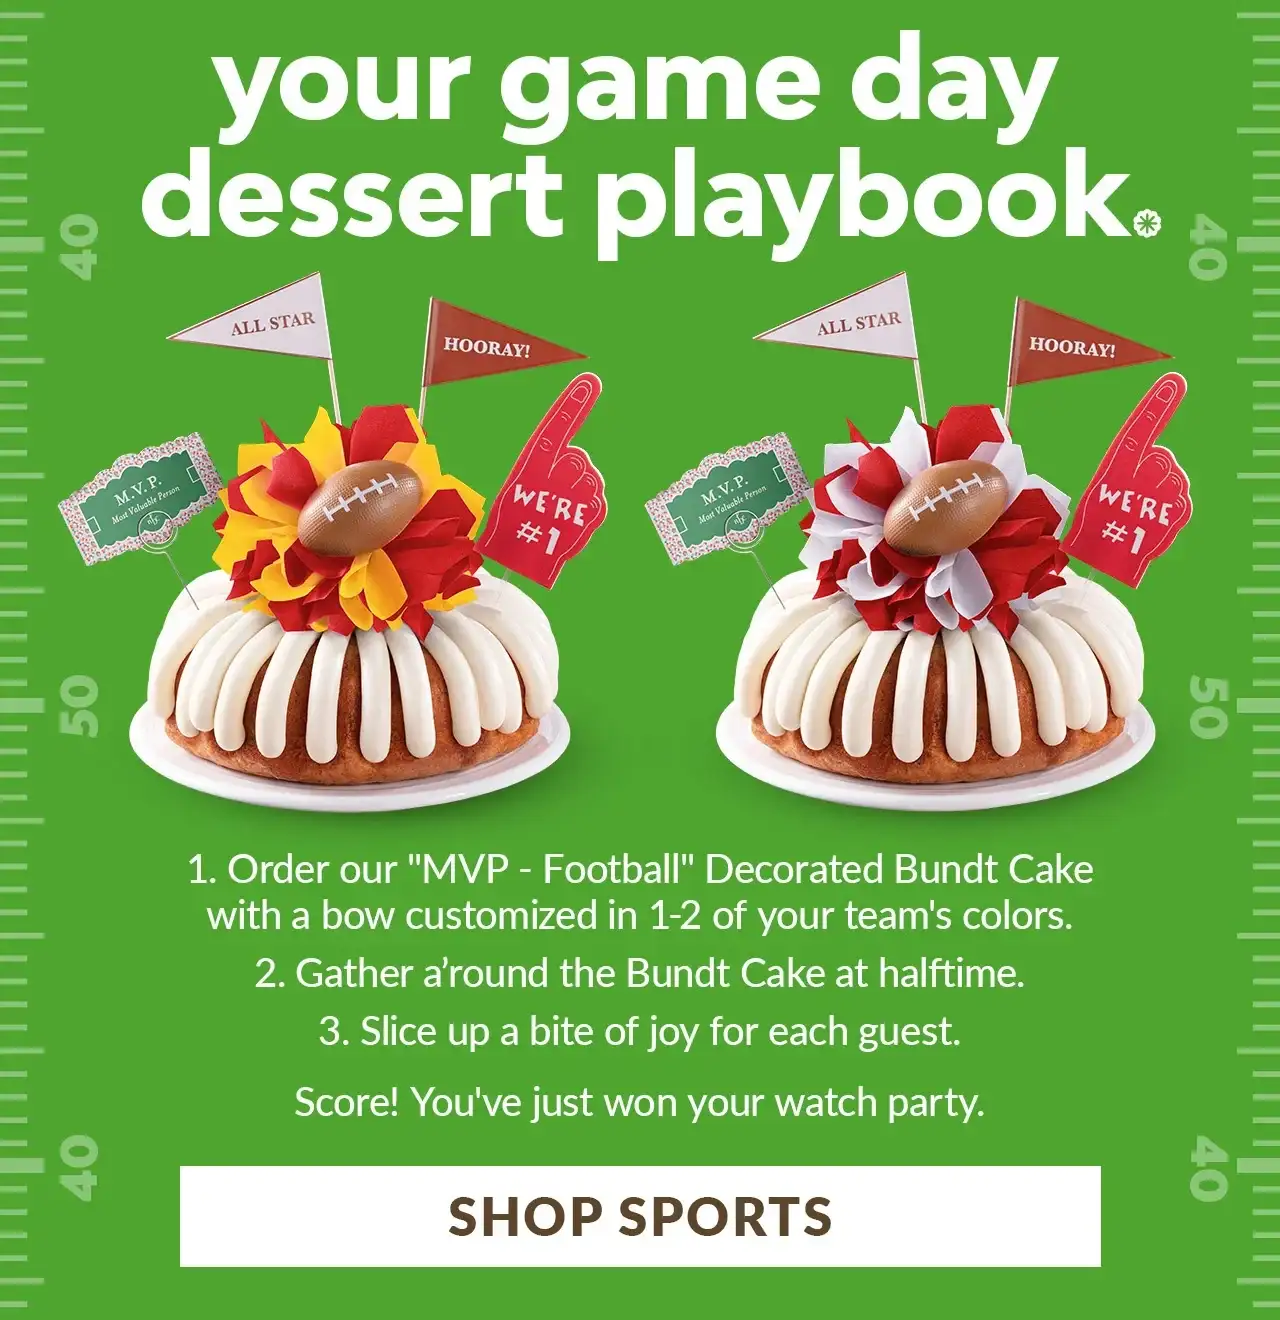 your game day dessert playbook